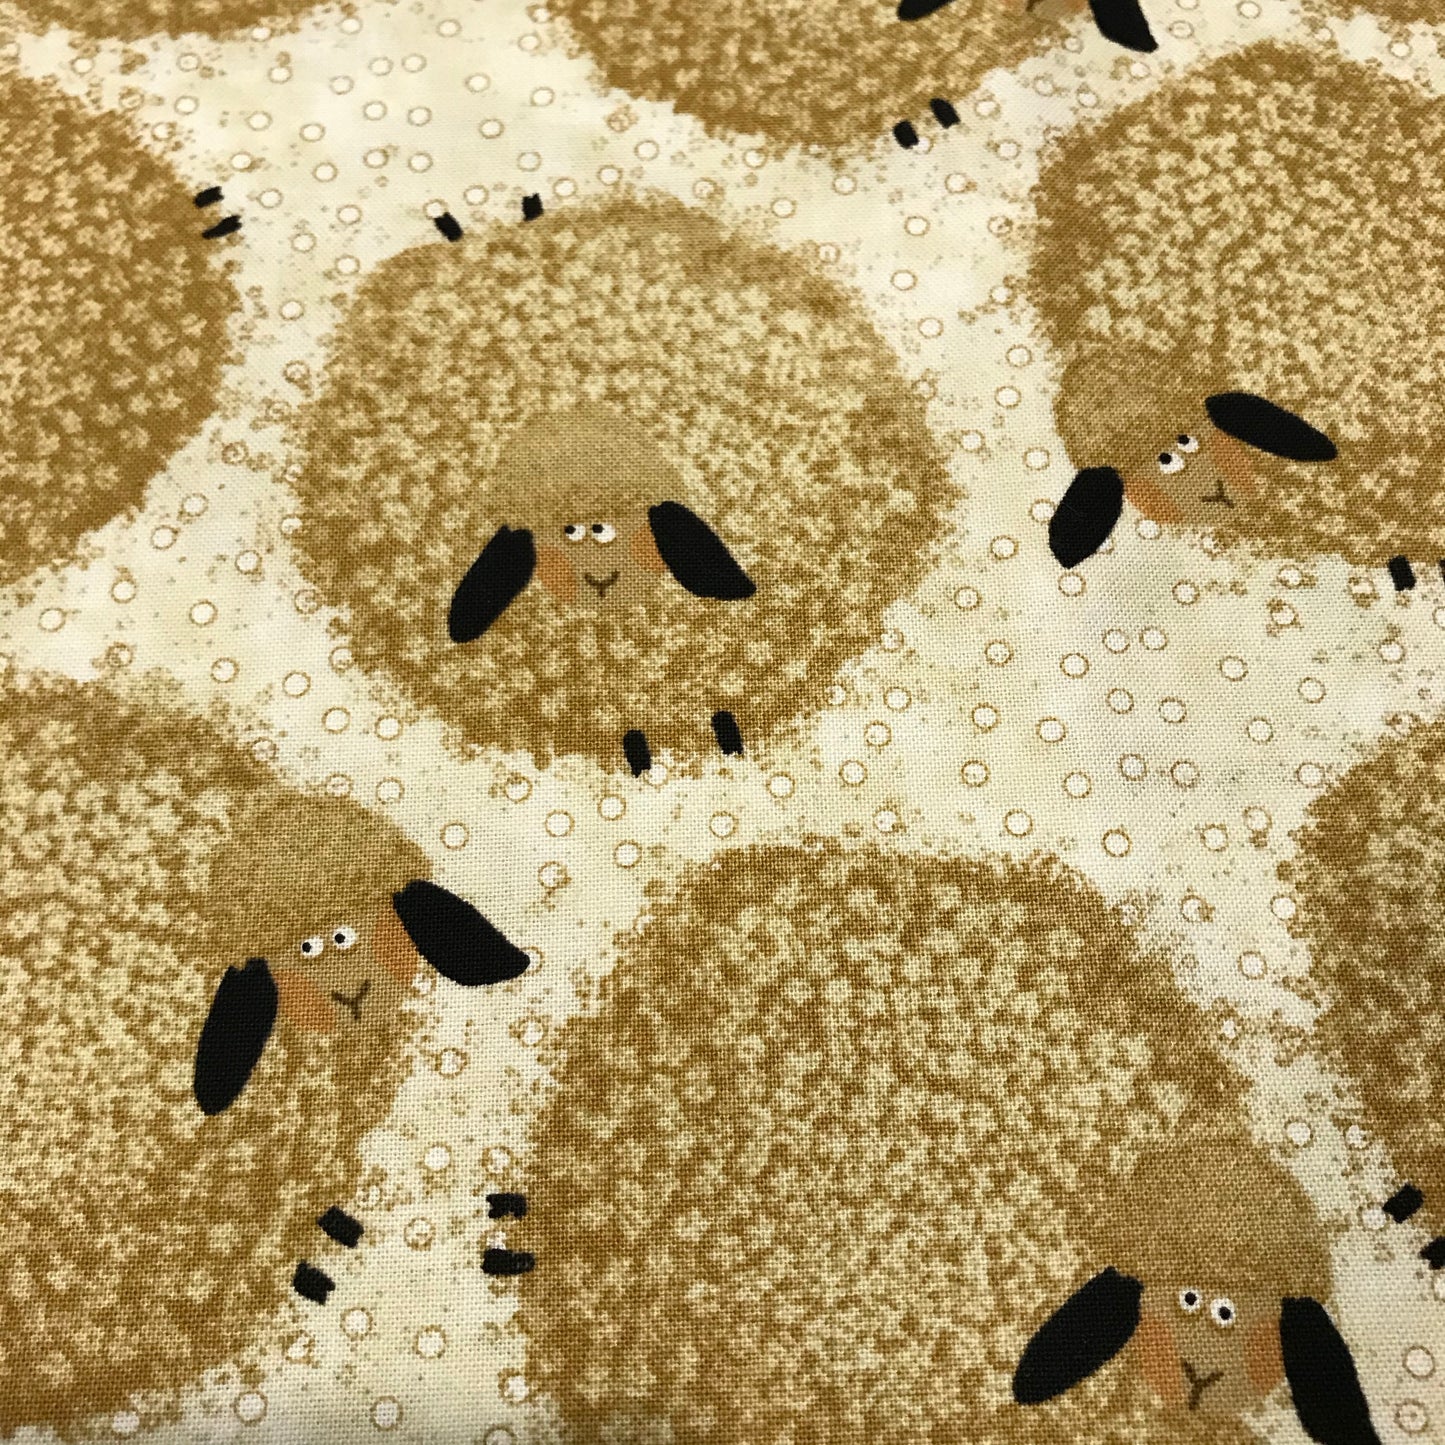 Stand Mixer Bowl Covers - Fluffy Sheep